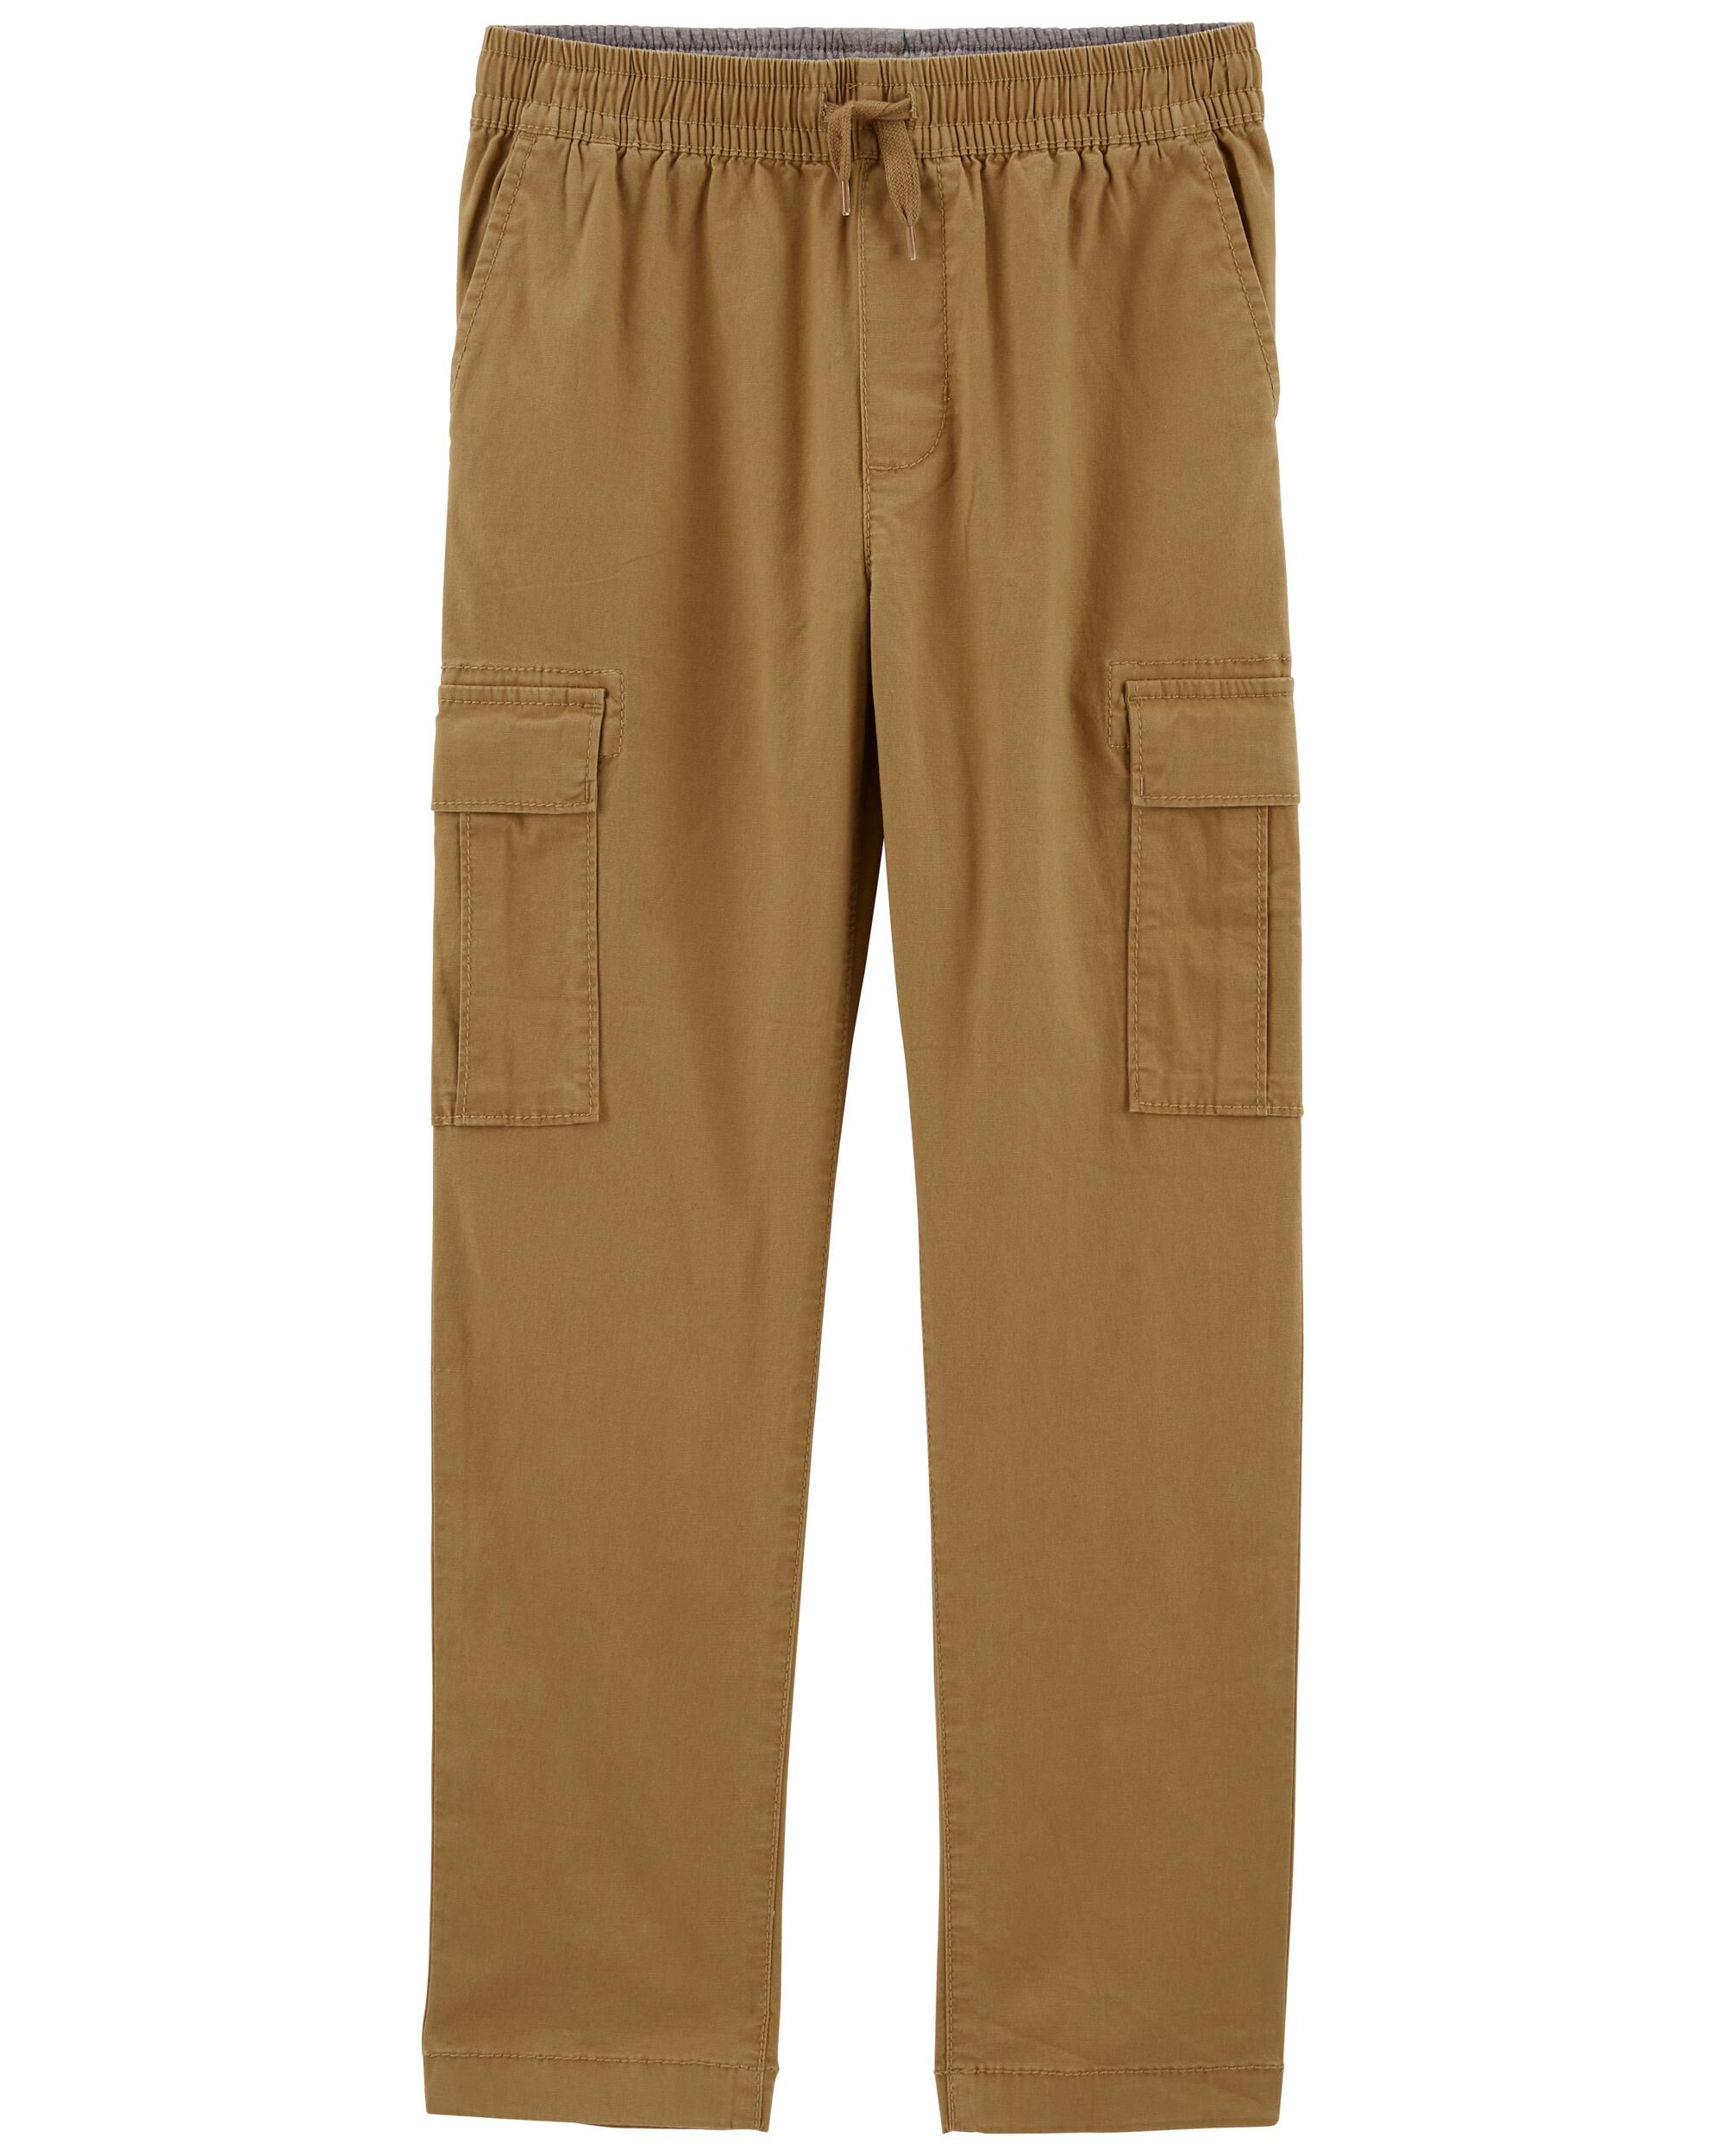 Big and Tall Work Pants in Big and Tall Occupational and Workwear   Walmartcom